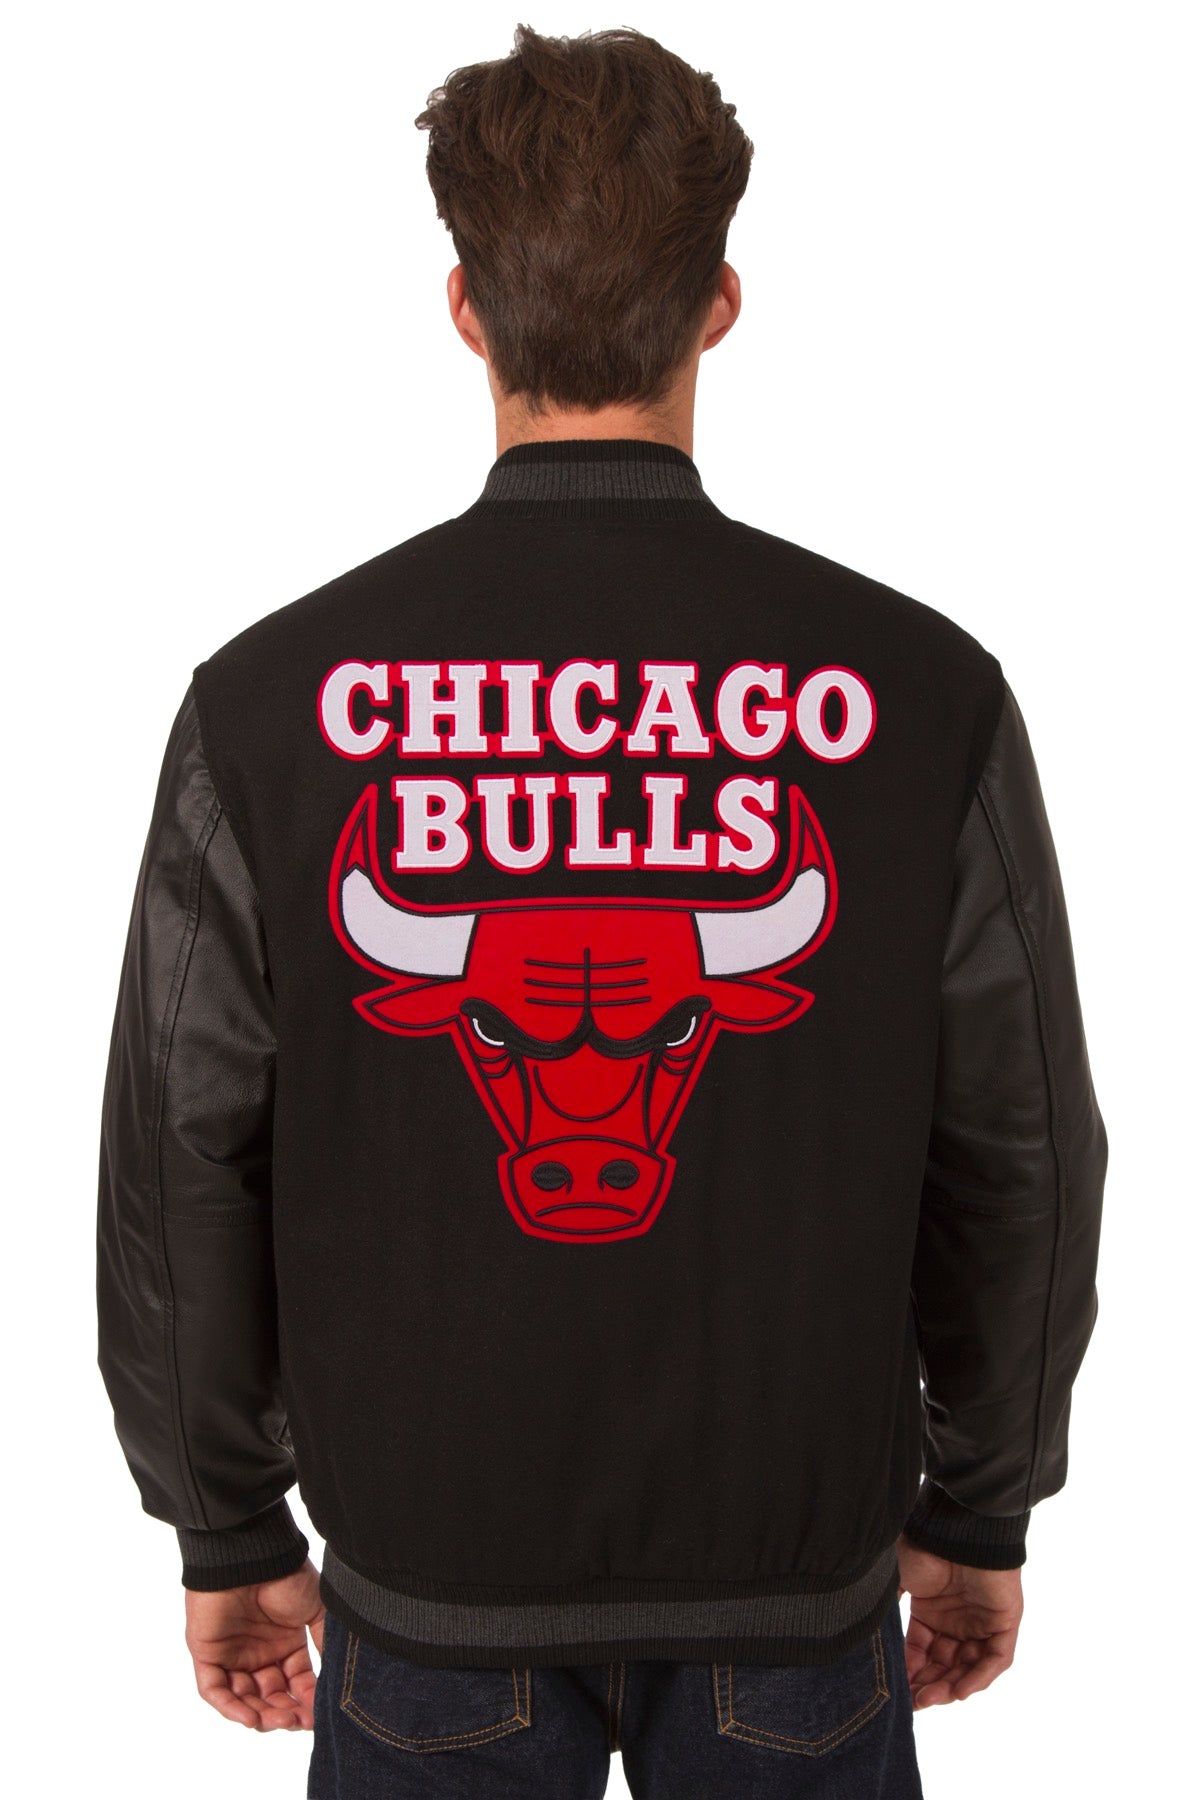 Chicago Bulls JH Design Big & Tall All Wool Jacket with Leather Logo -  Black/Red